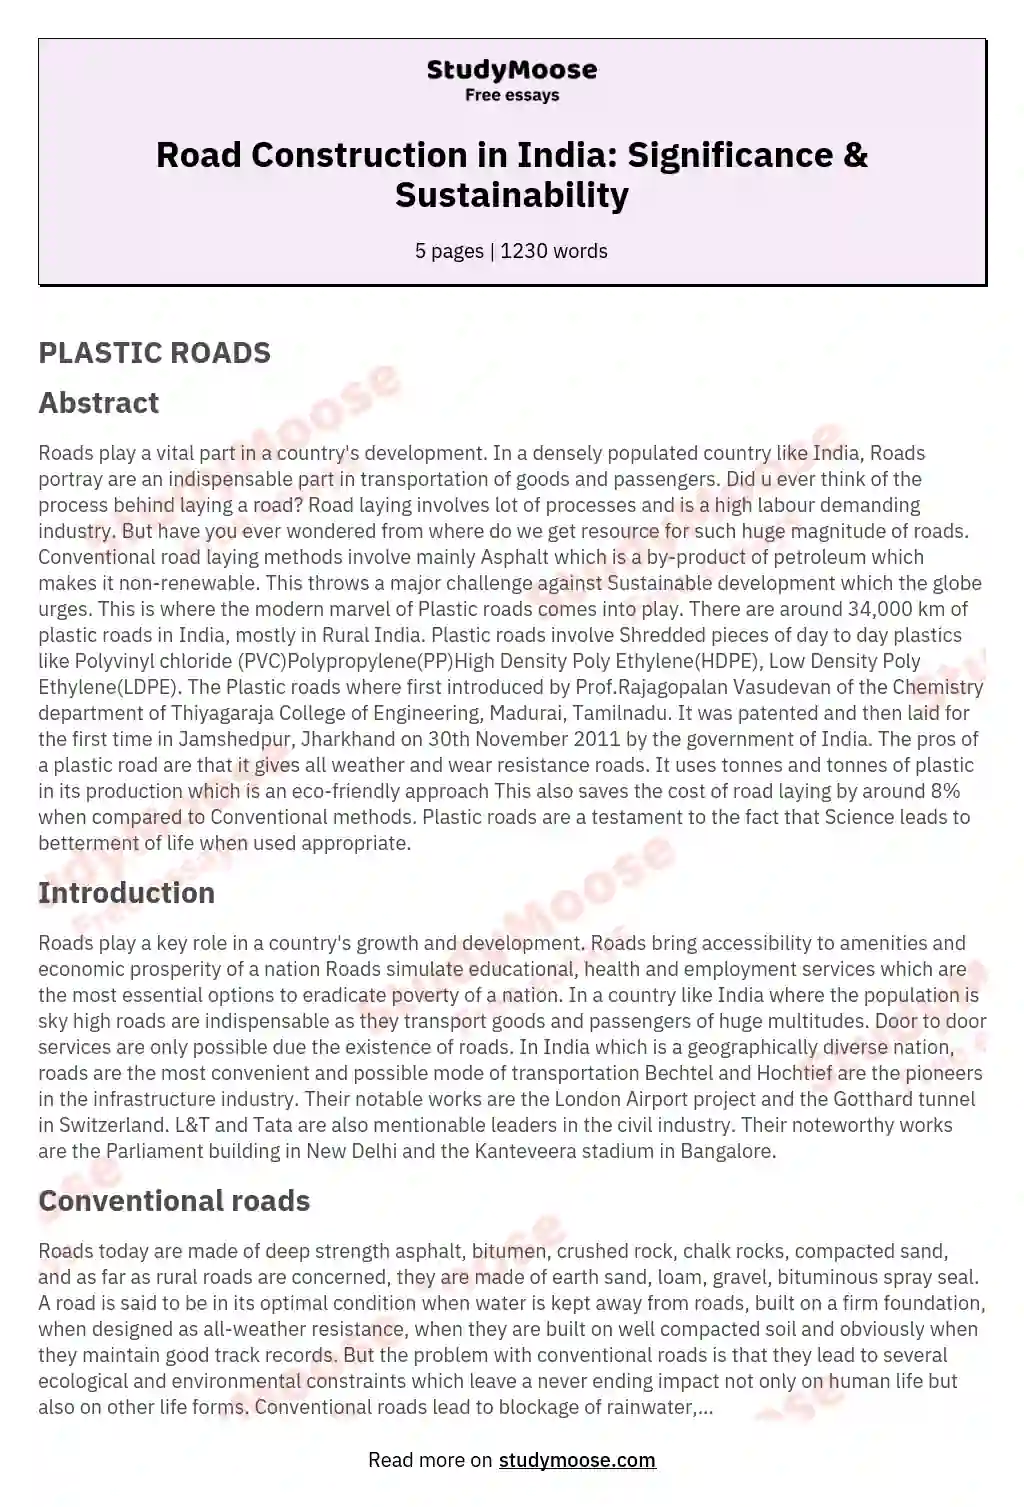 Road Construction in India: Significance & Sustainability essay